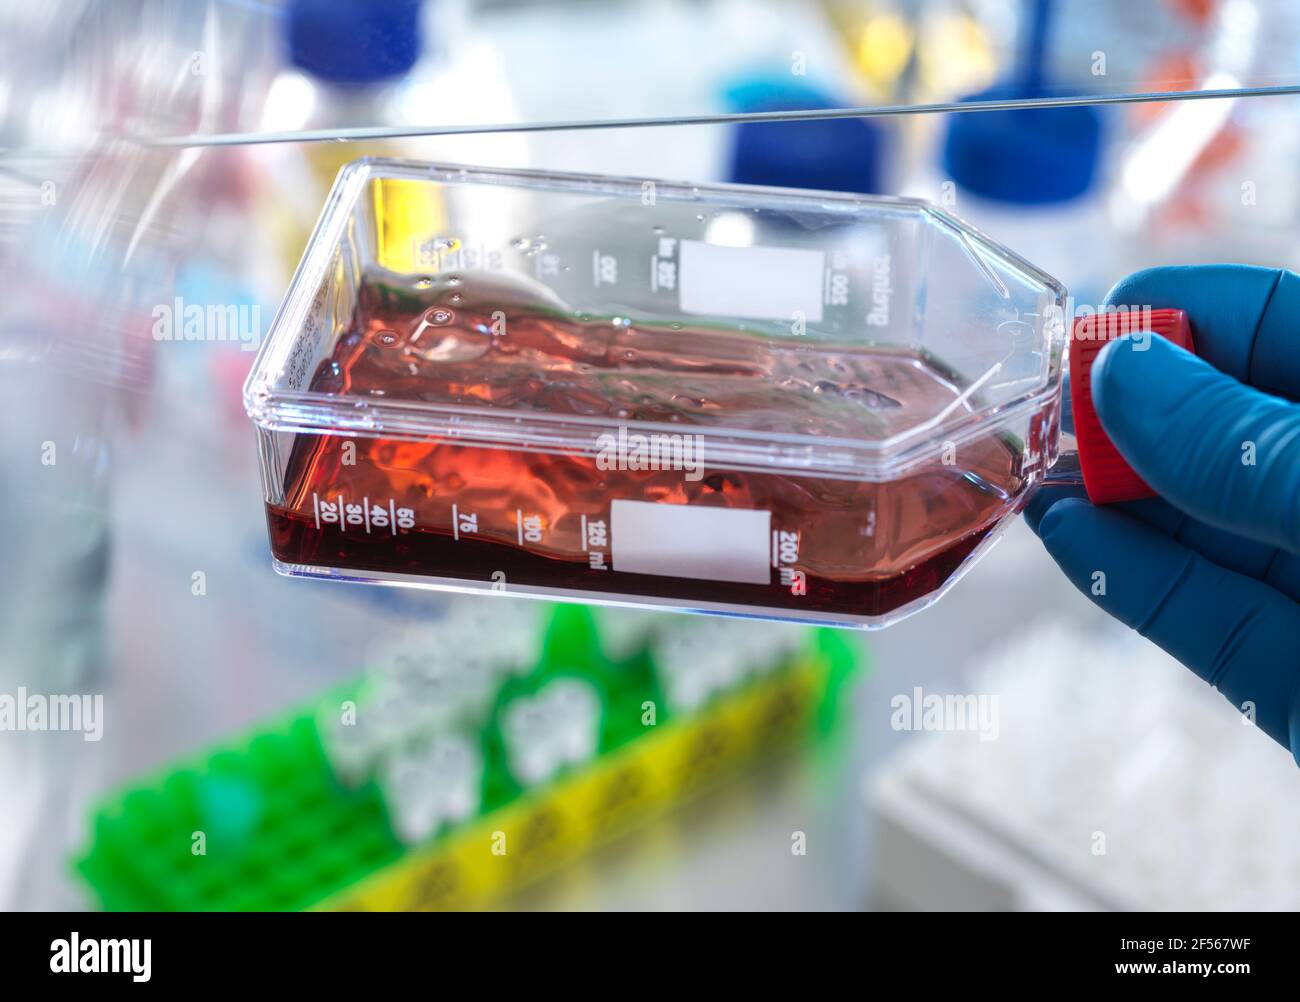 Scientist holding jar containing blood cells while doing experiment in laboratory Stock Photo